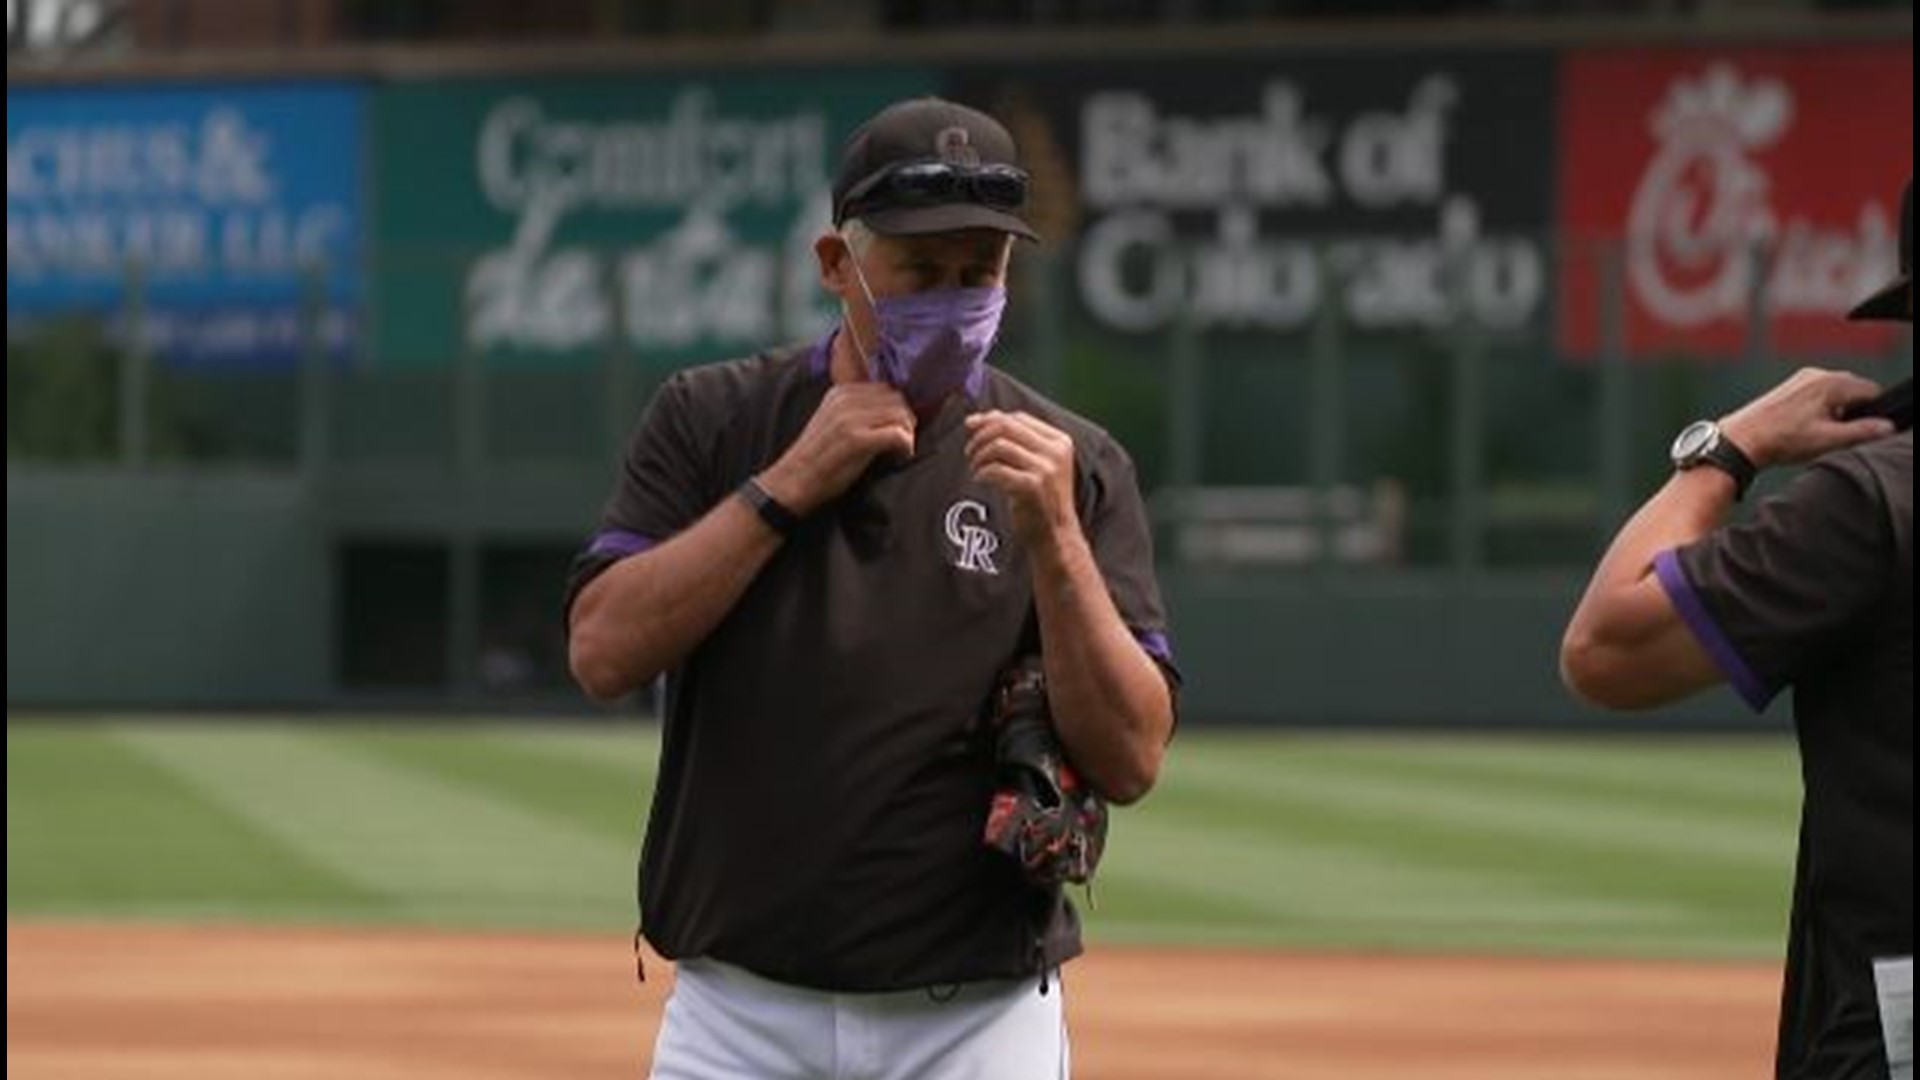 The Colorado Rockies returned to Coors Field for their first official practice of the MLB Summer Camp on Saturday. Masks were a must for all players and personnel.